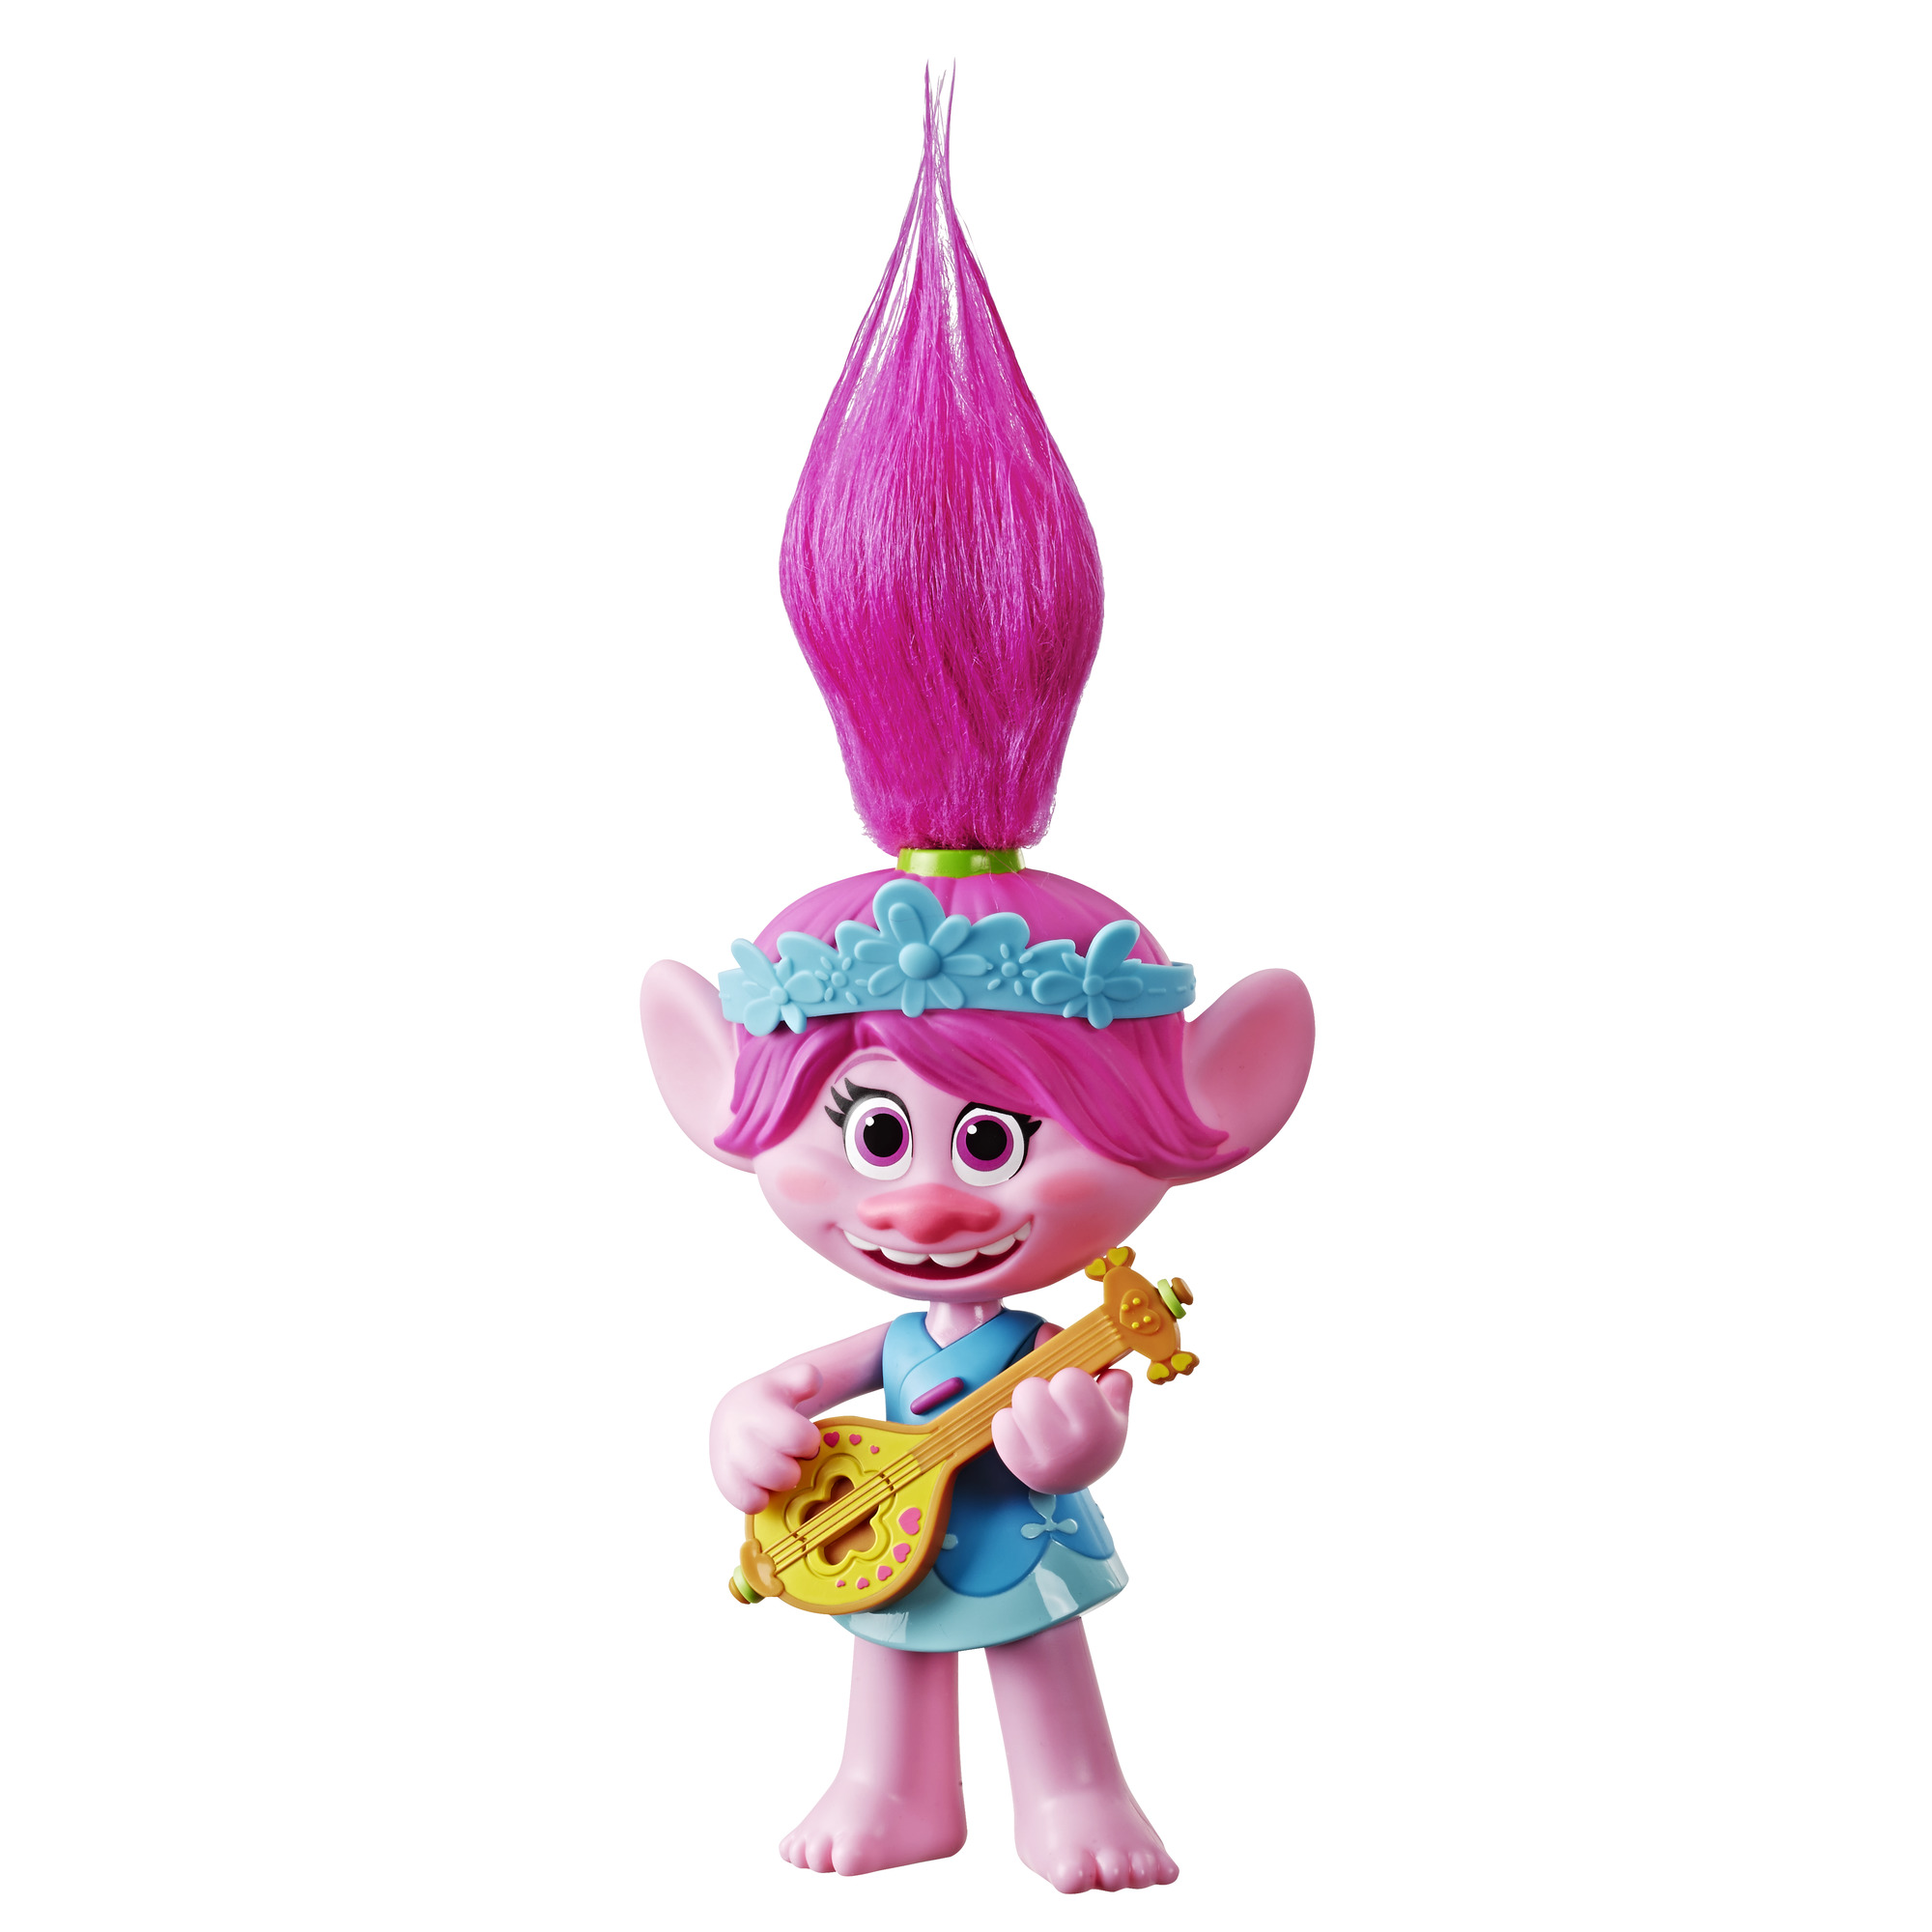 DreamWorks Trolls Popstar Poppy Singing Doll, Includes Toy Ukulele, Plays Movie Song - image 1 of 3